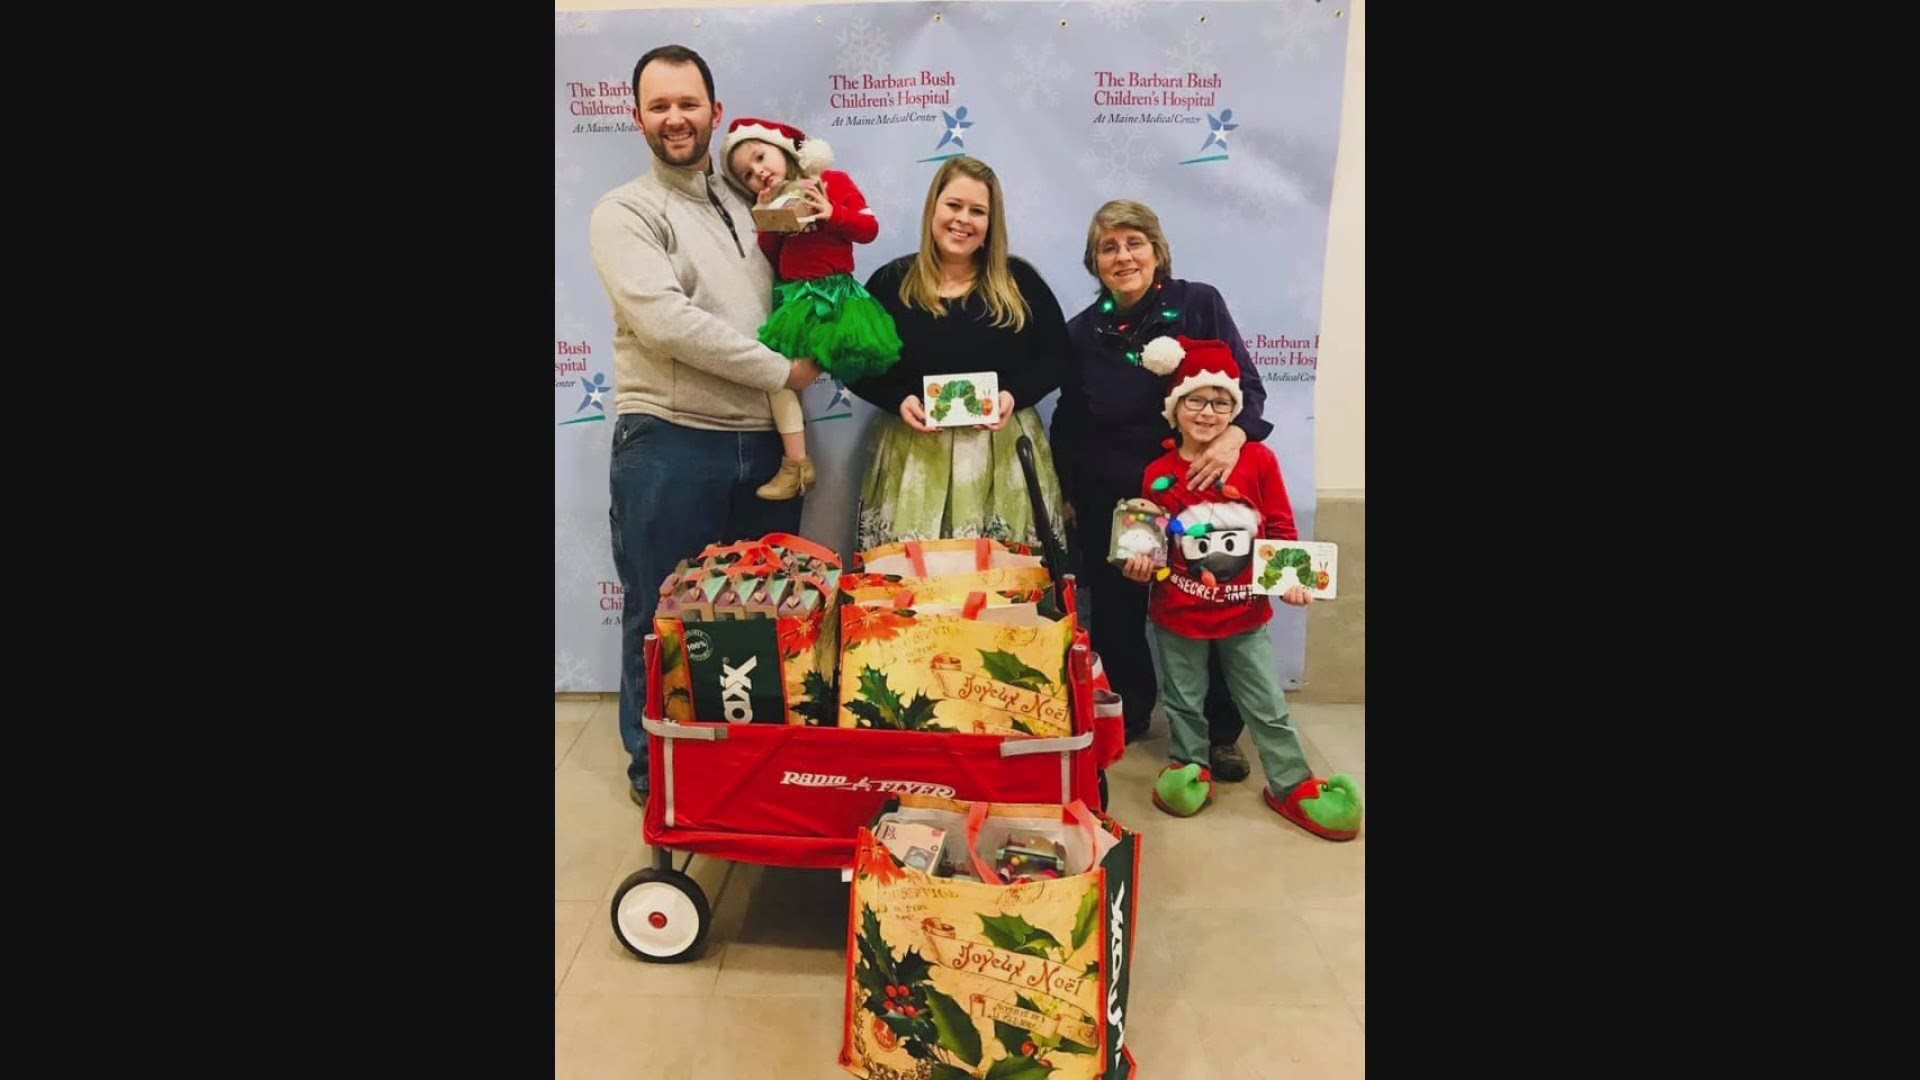 8-year-old, RJ Bourgeois in Greene has fundraised for kids at Barbara Bush Children's Hospital for the last three years and in total has raised more than $10,000.